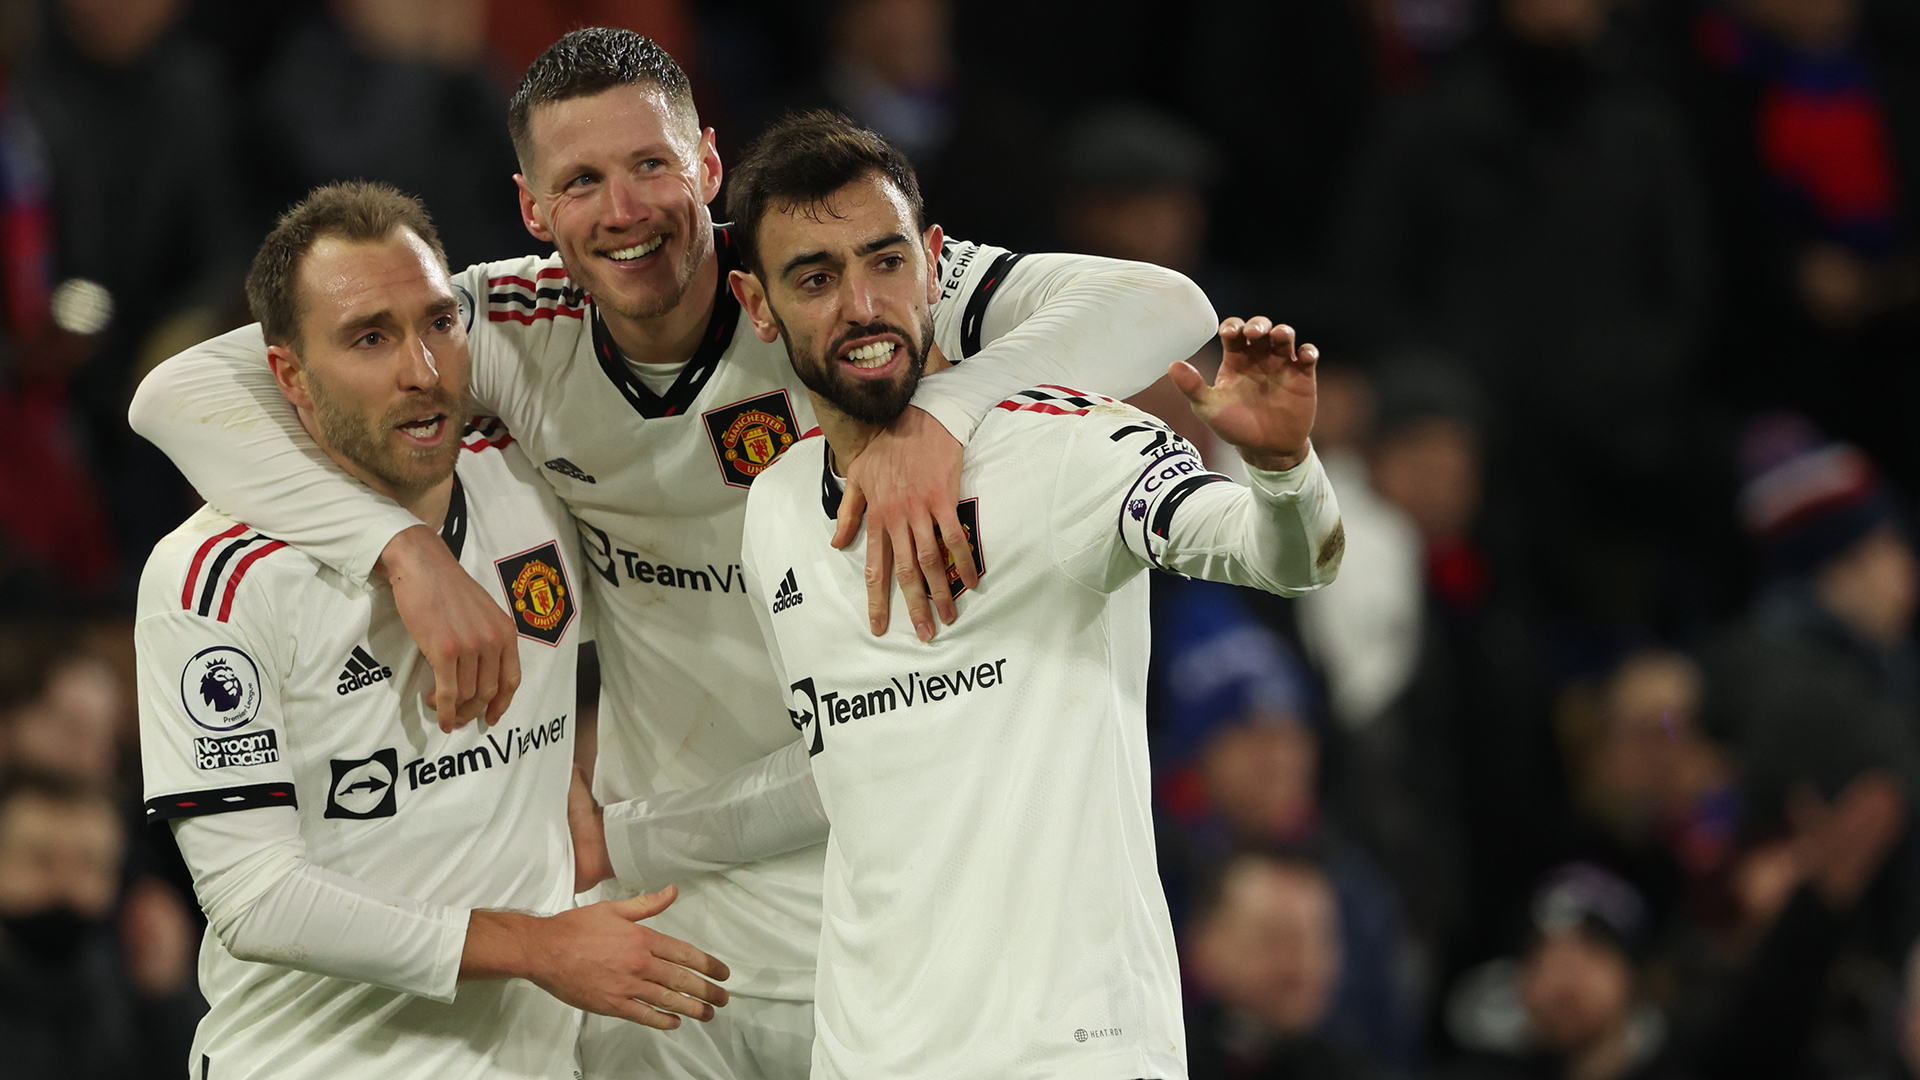 Bruno Fernandes of Manchester United celebrates after scoring a goal to make it 0-1 with Christian Eriksen and Wout Weghorst during the Premier League match between Crystal Palace and Manchester United at Selhurst Park on January 18, 2023 in London, United Kingdom.